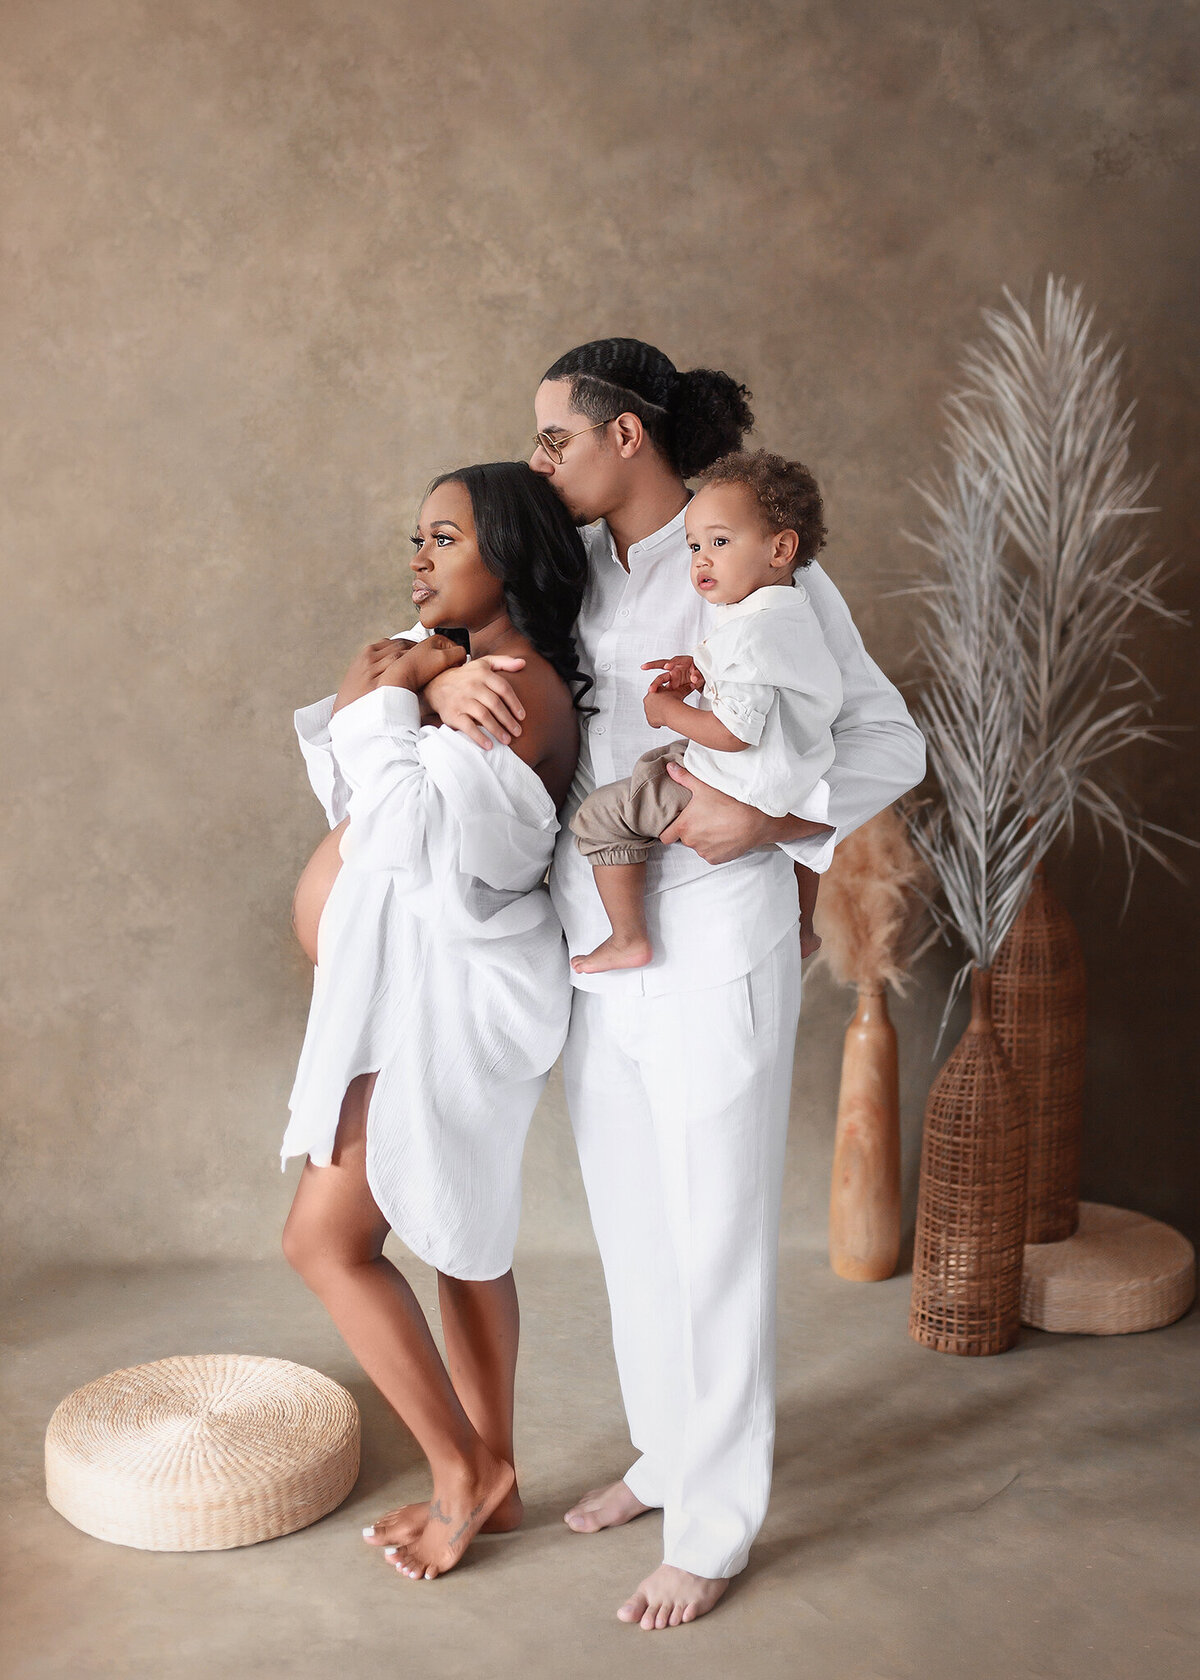 Expecting couple along with toddler chilld on a light brown background wiht tropical  feeling background with dried palm leaves, rattan , wearing white